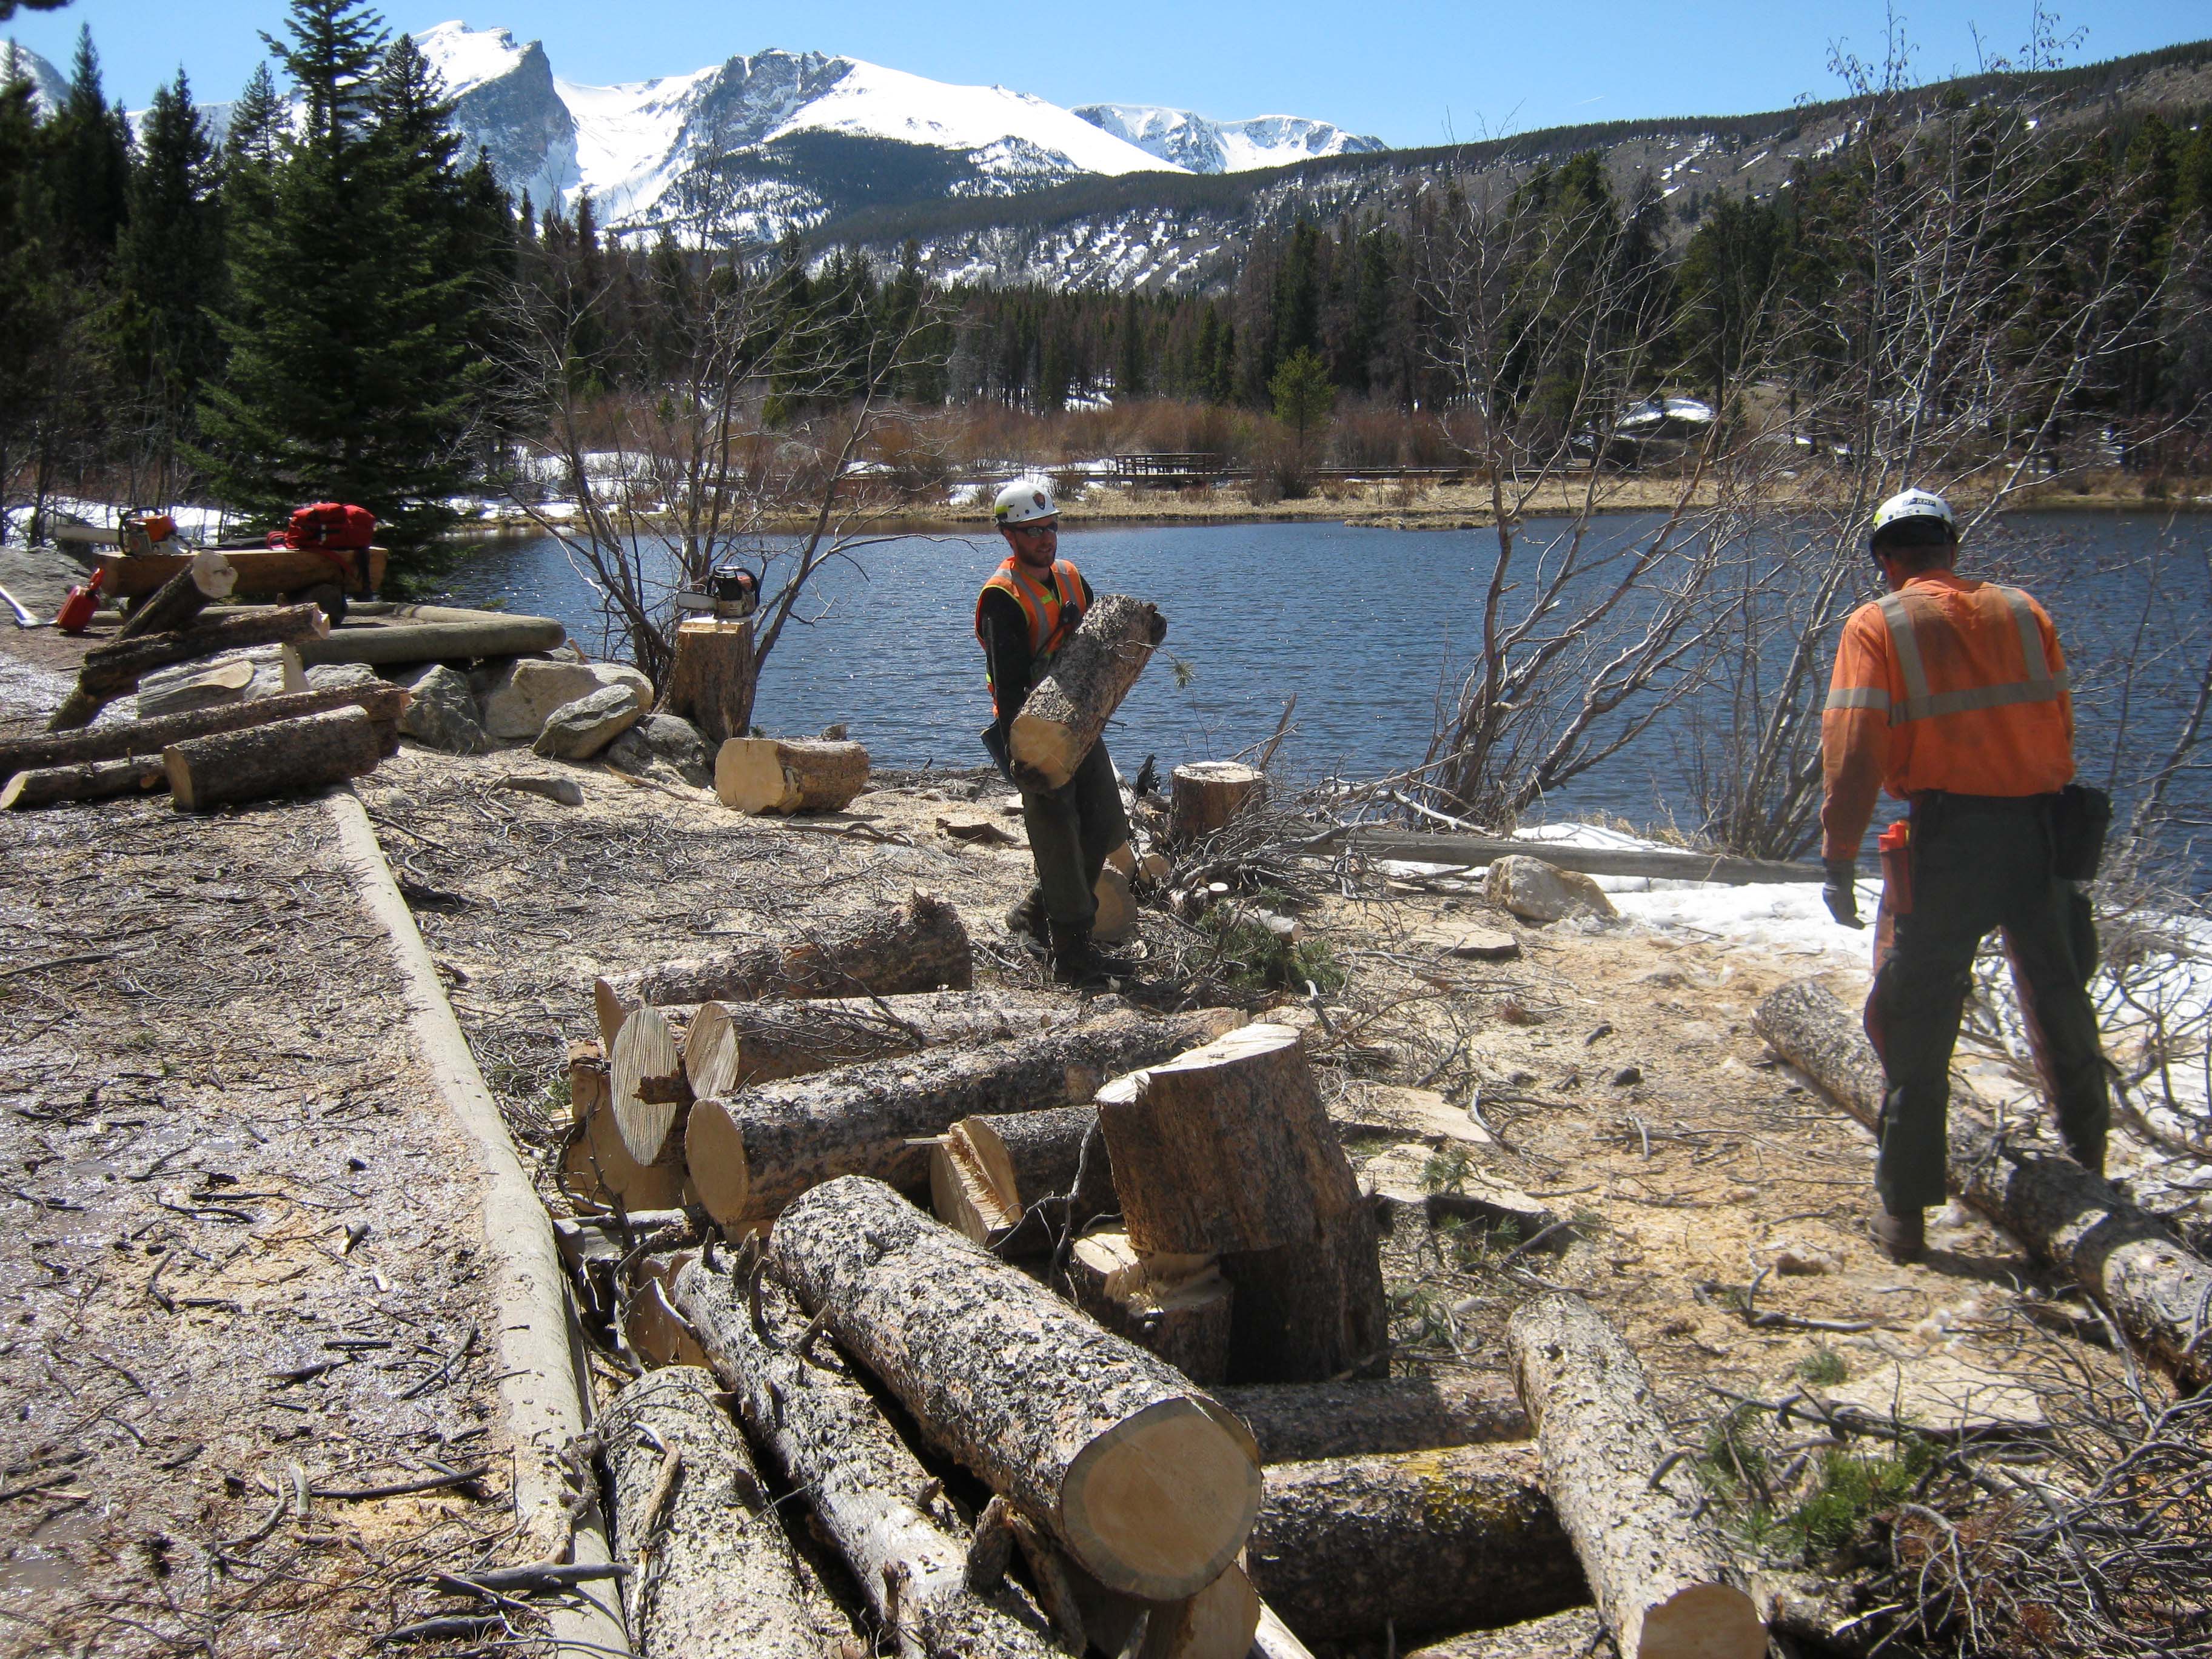 Hazard tree mitigation along Sprague Lake paid for by park fees.